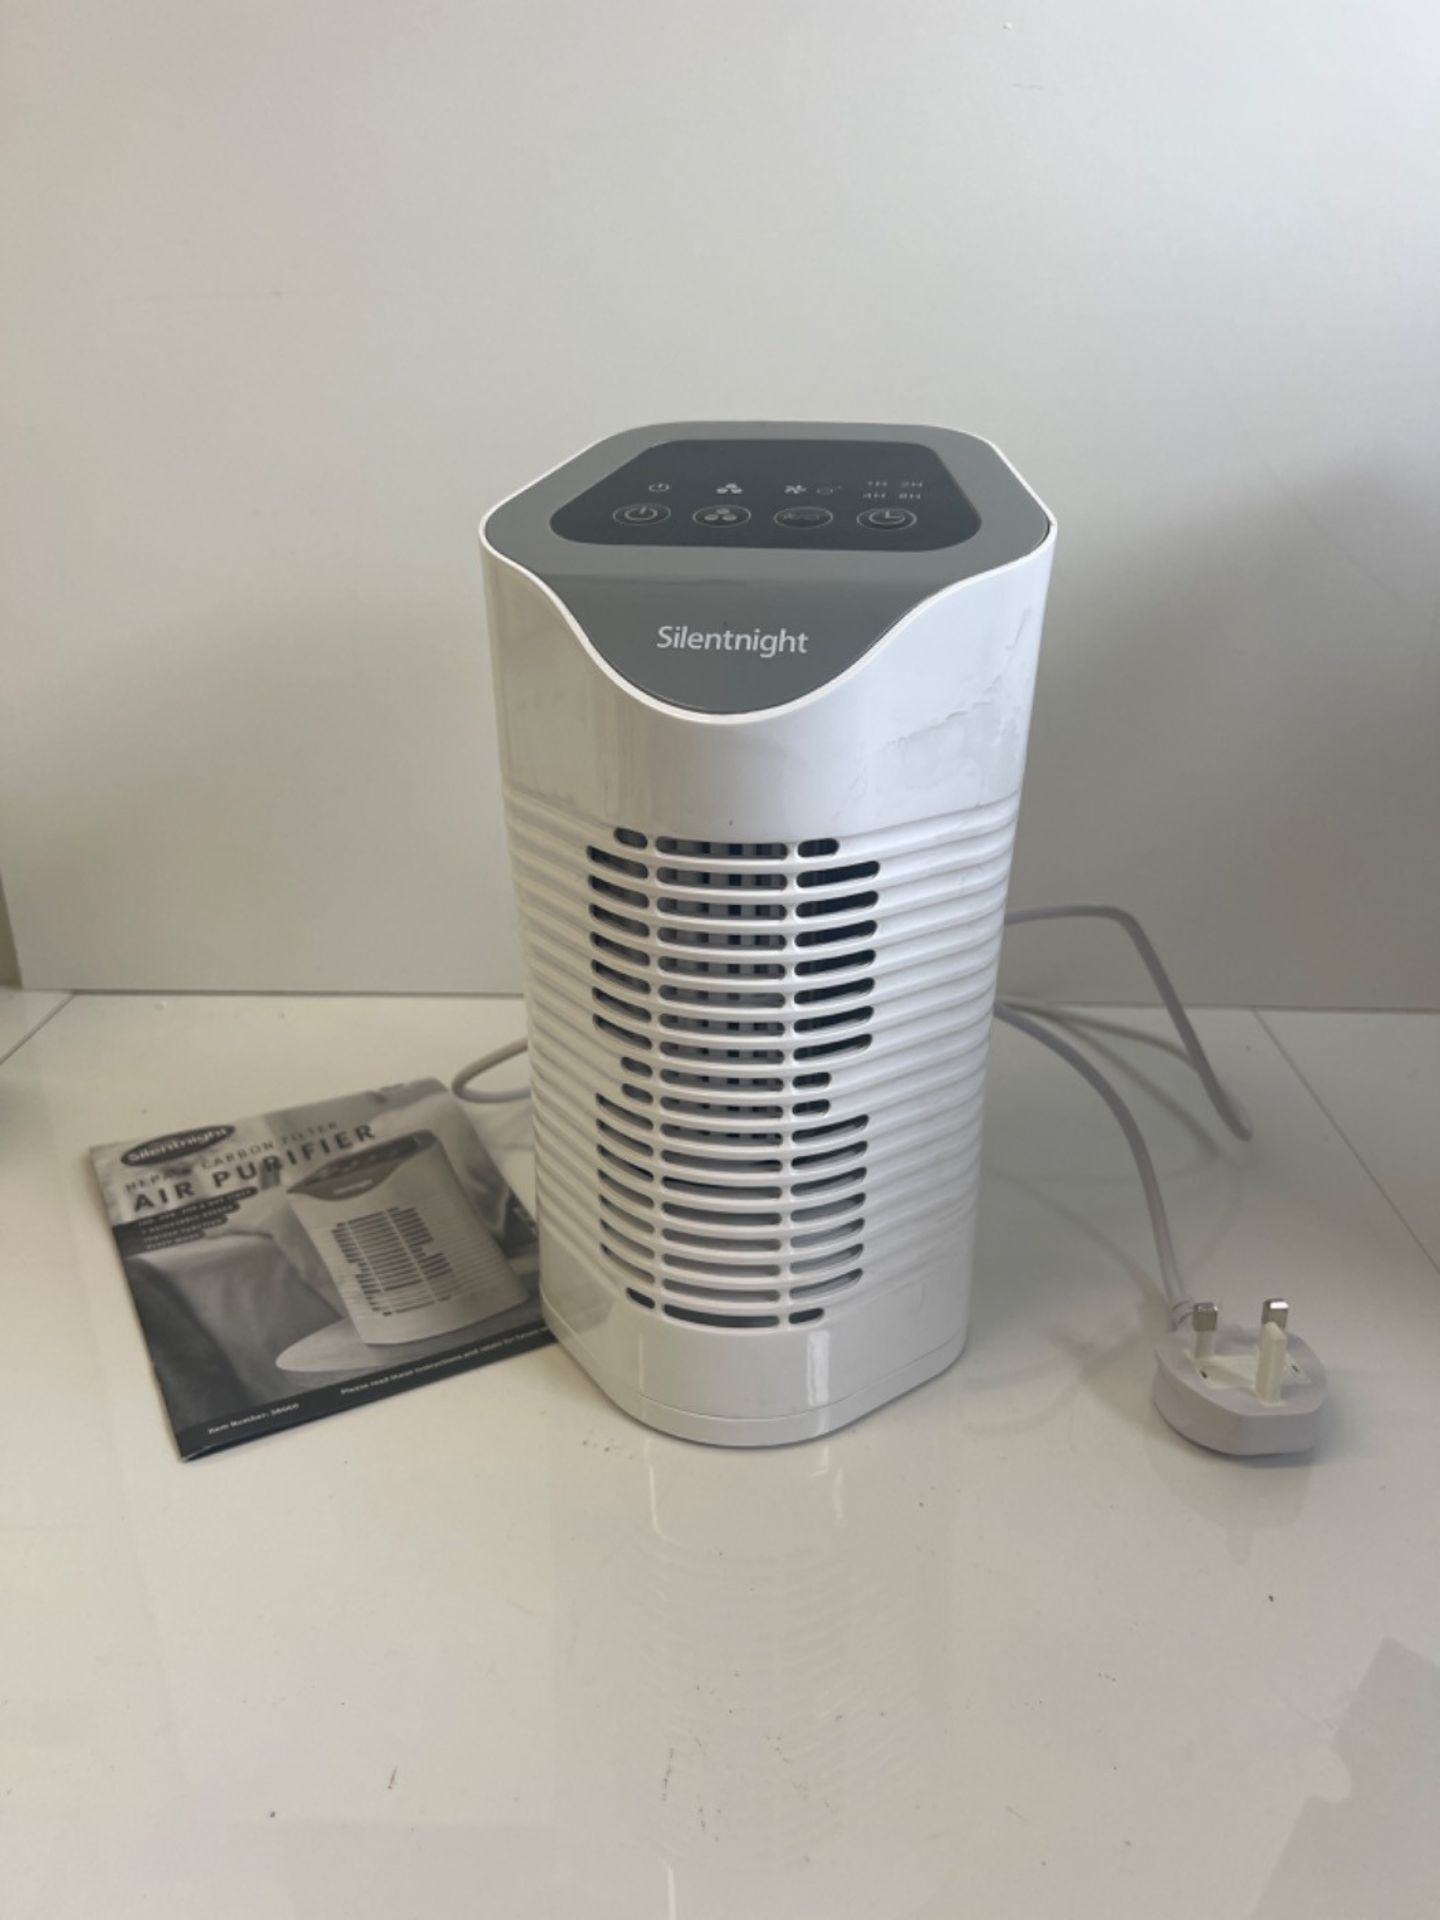 Silentnight Air Purifier with HEPA & Carbon Filters, Air Cleaner for Allergies, Pollen, Pets, Dust, - Image 3 of 3